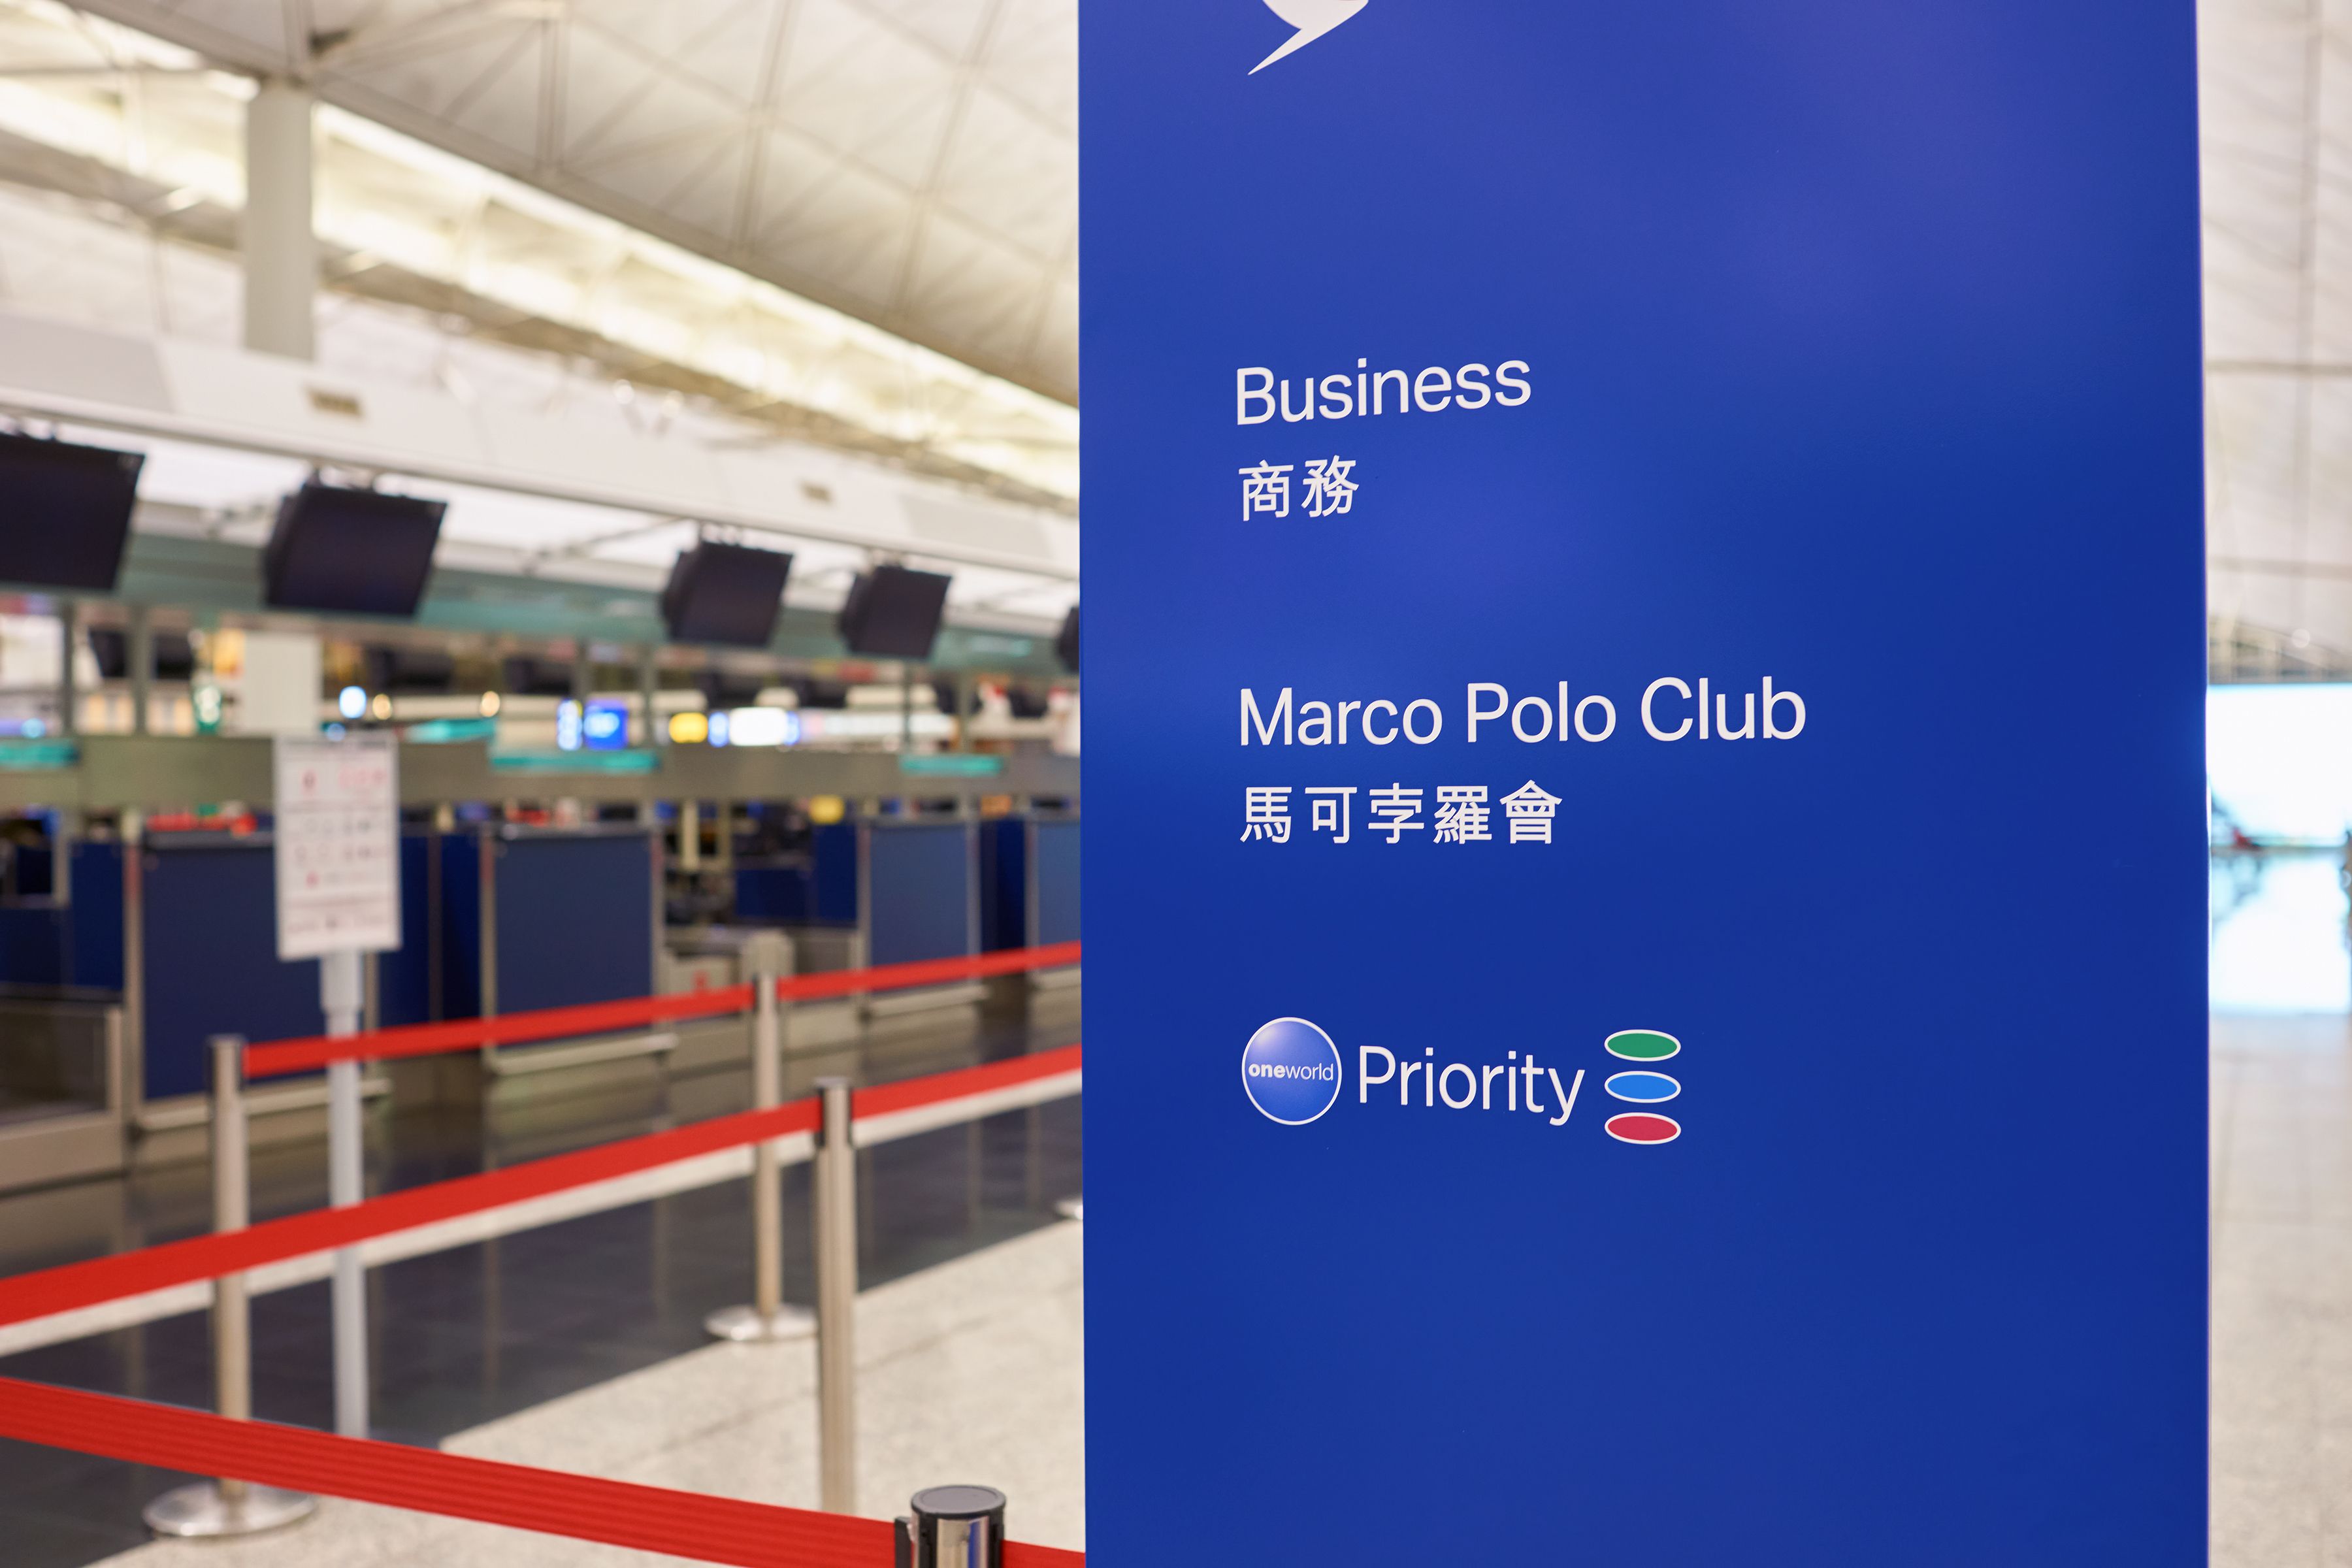 A Cathay Pacific business class check-in sign.